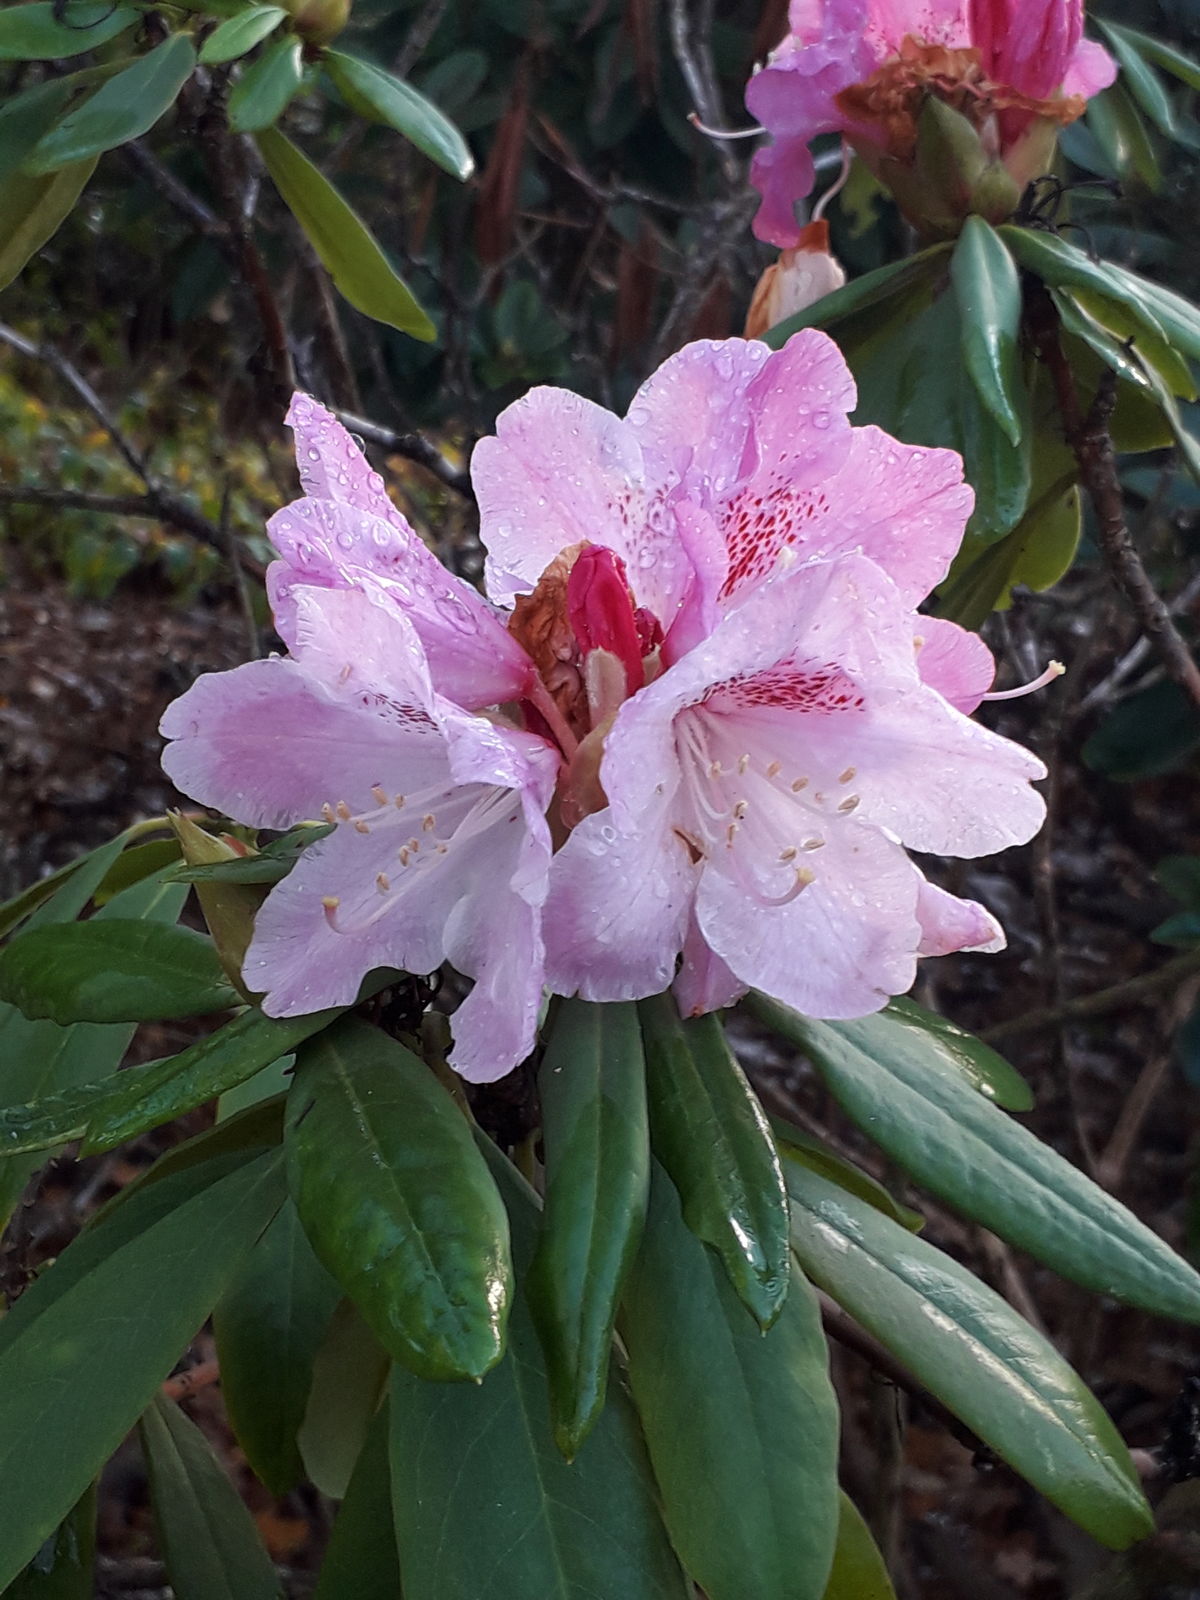 Rhododendron L.   Plants of the World Online   Kew Science